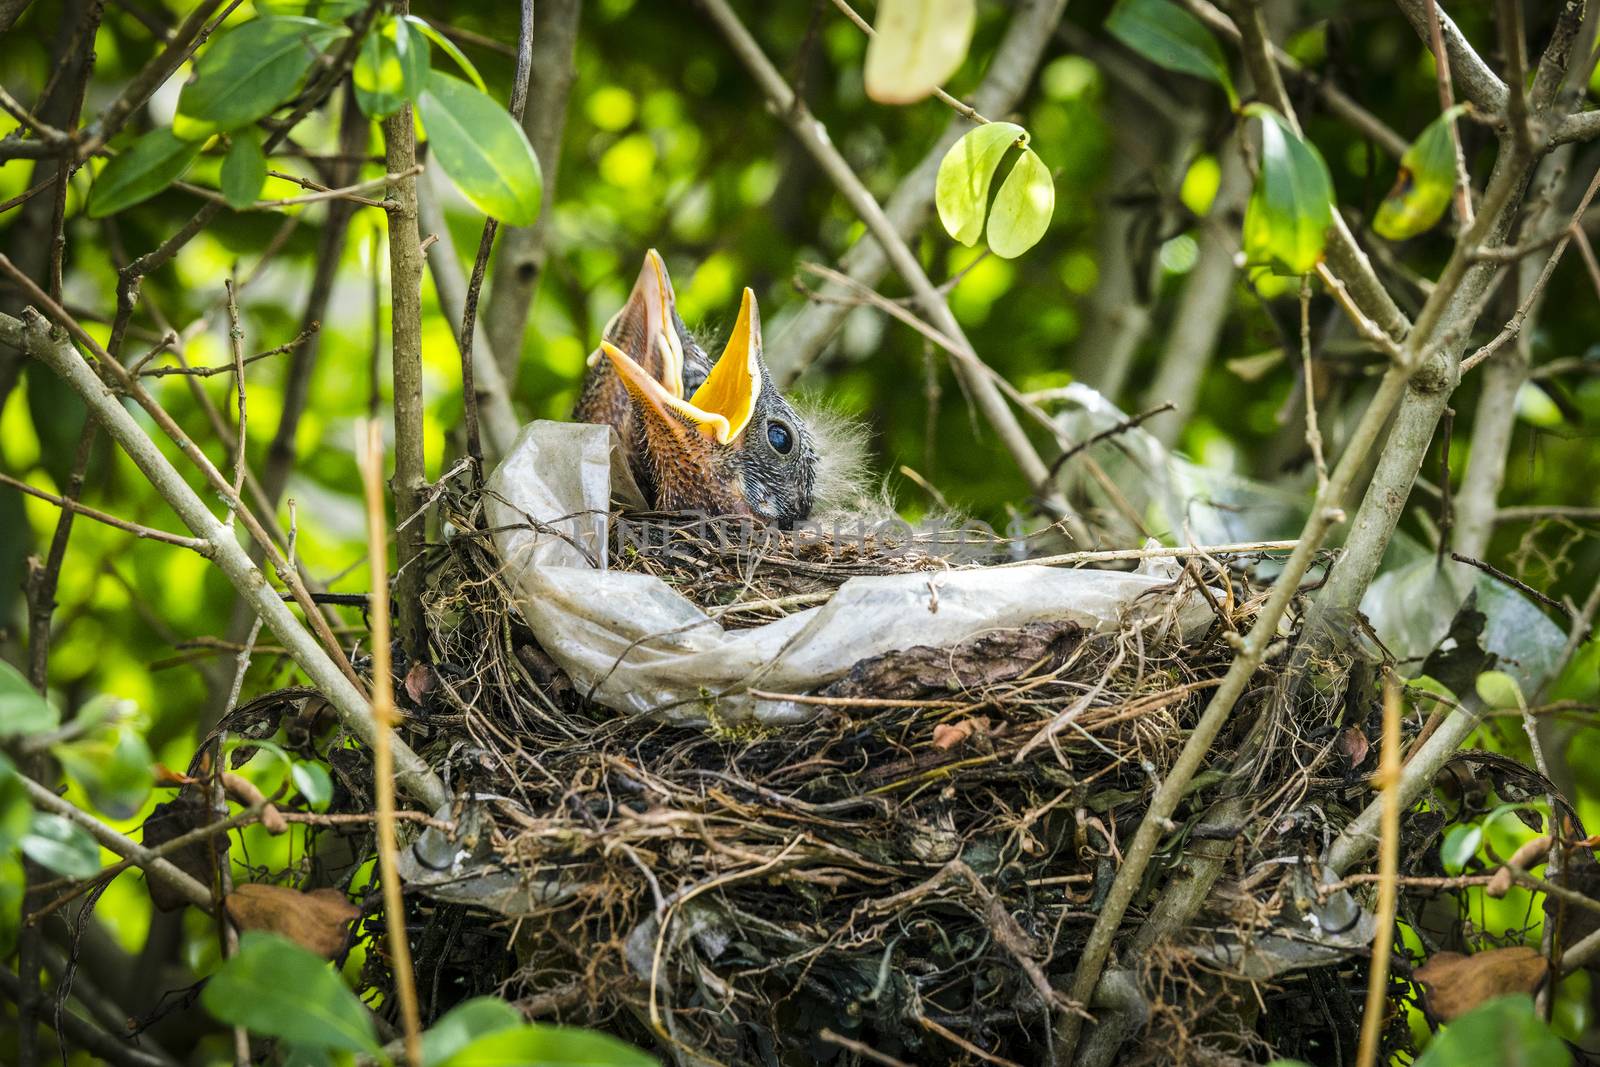 Newly hatched blackbirds in a birds nest by Sportactive